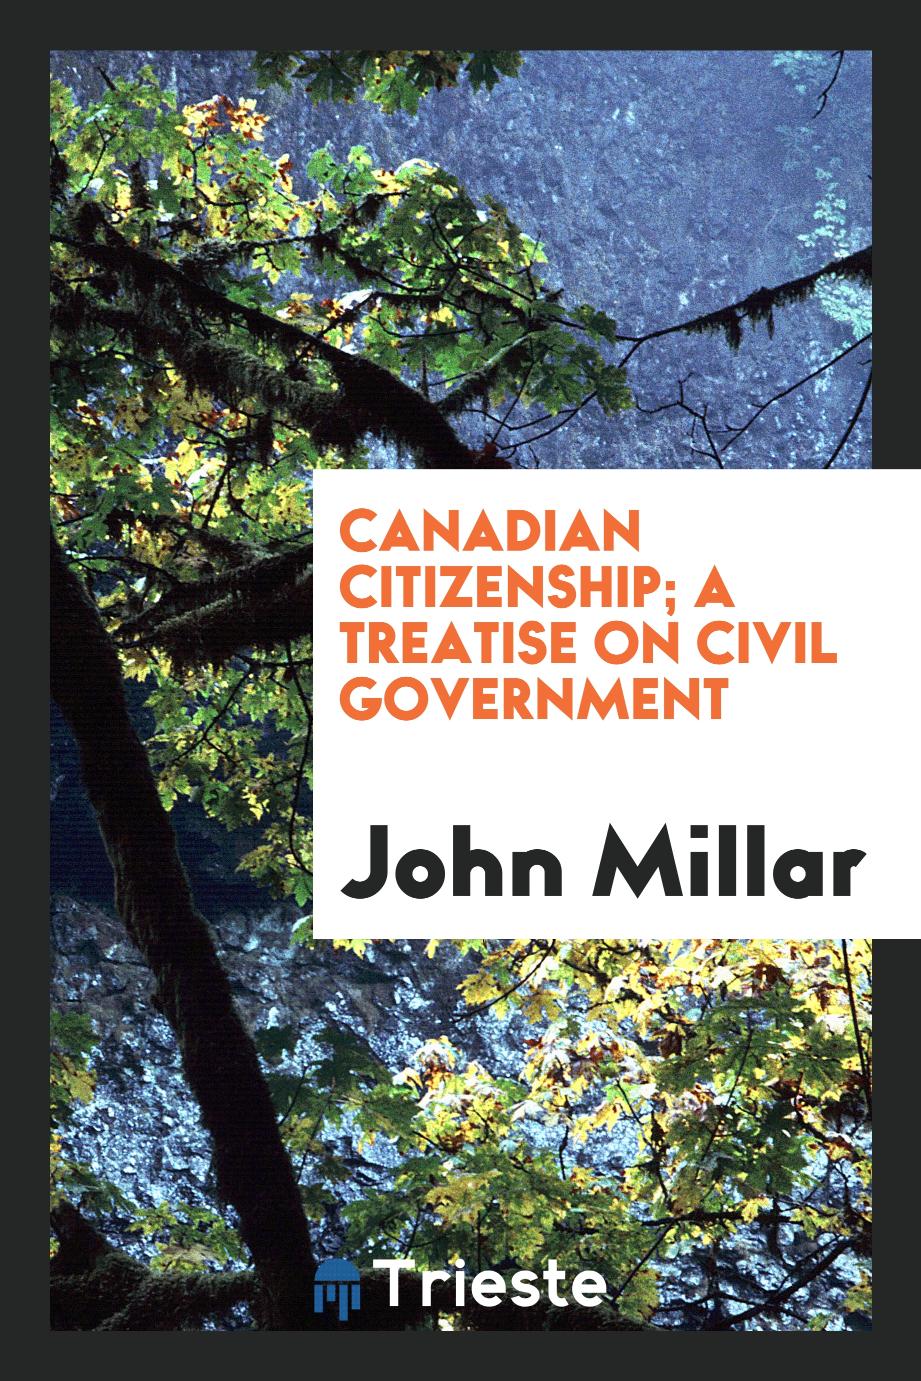 Canadian citizenship; a treatise on civil government